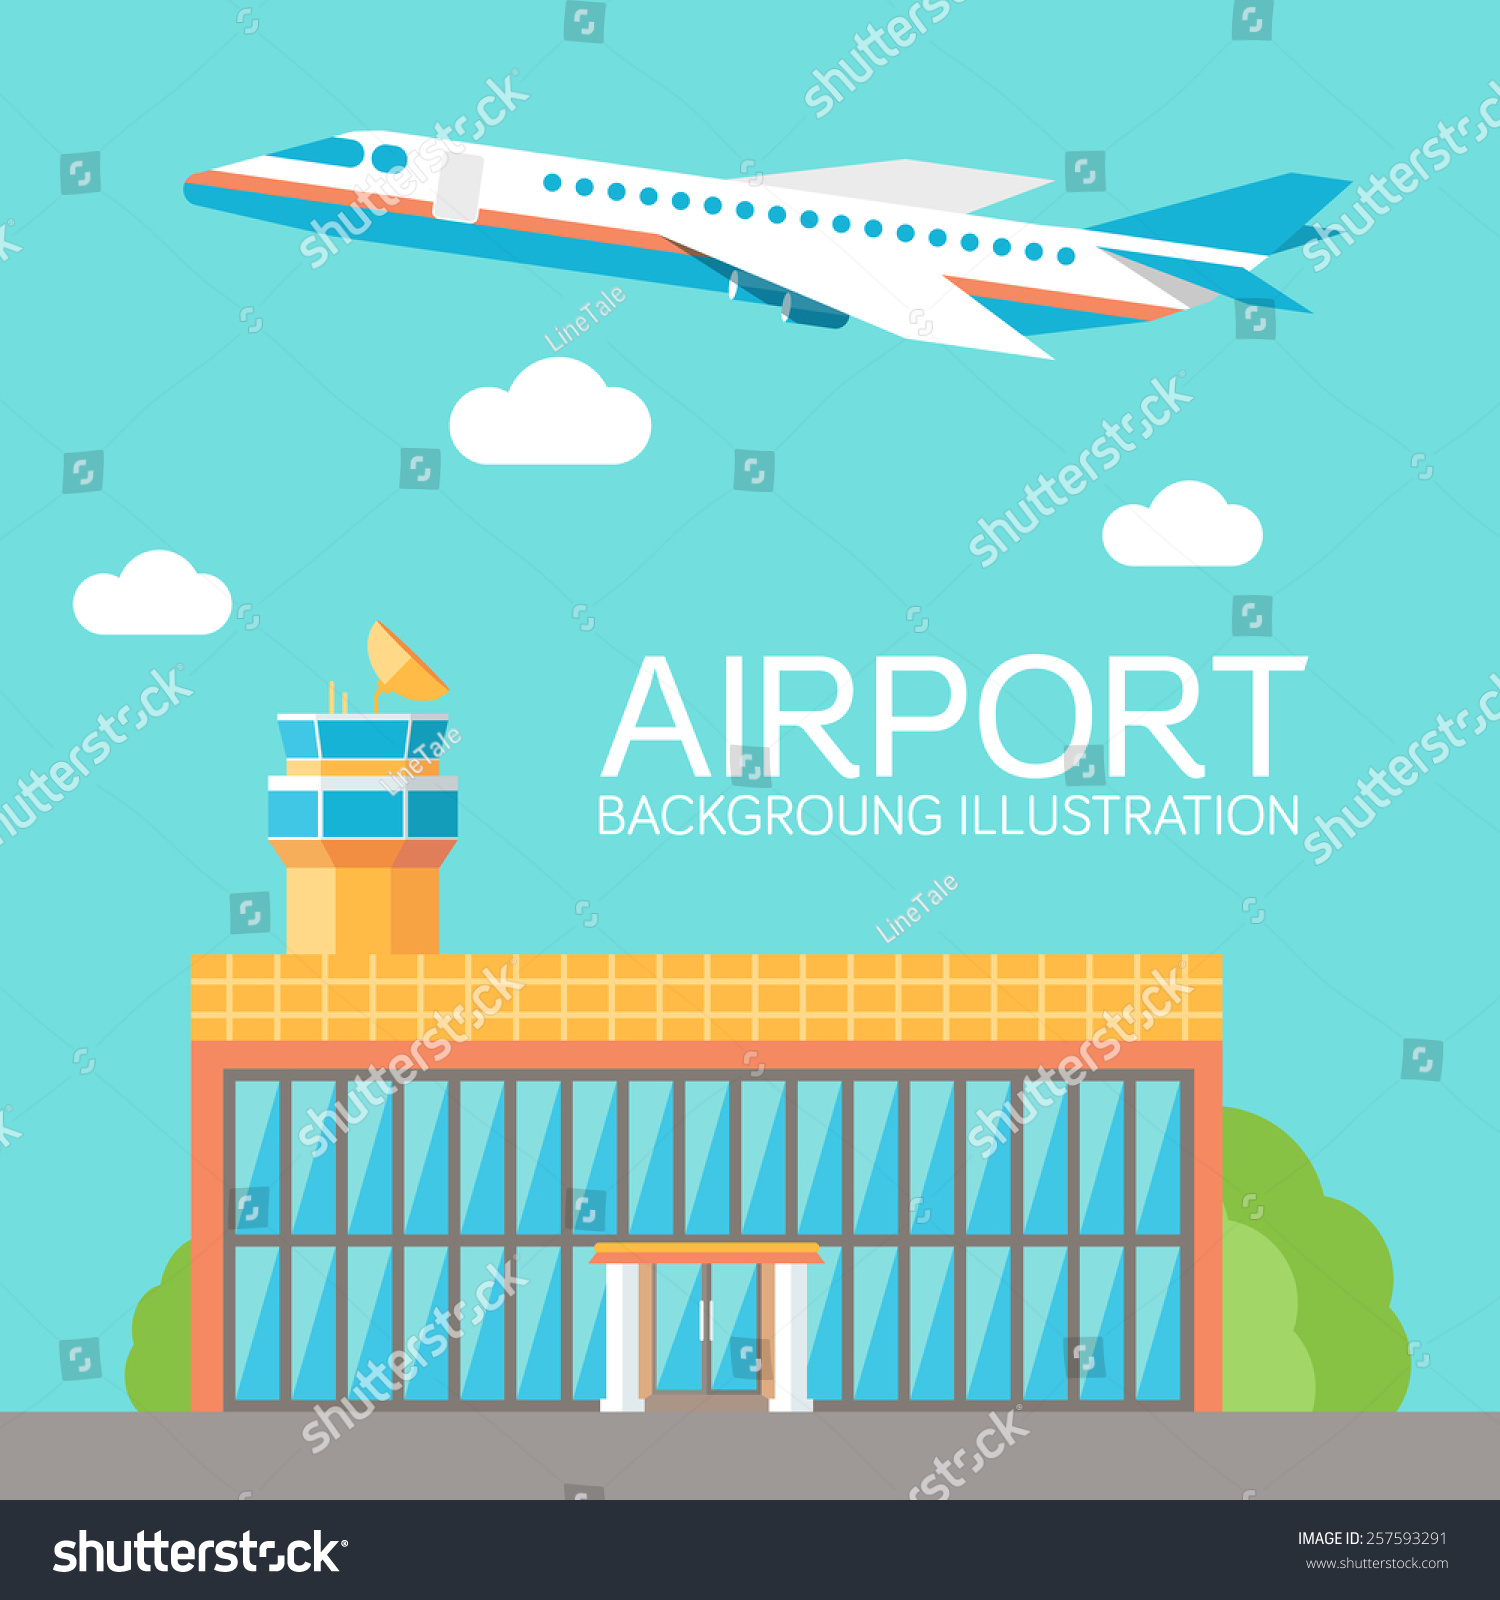 airport safety clipart - photo #14